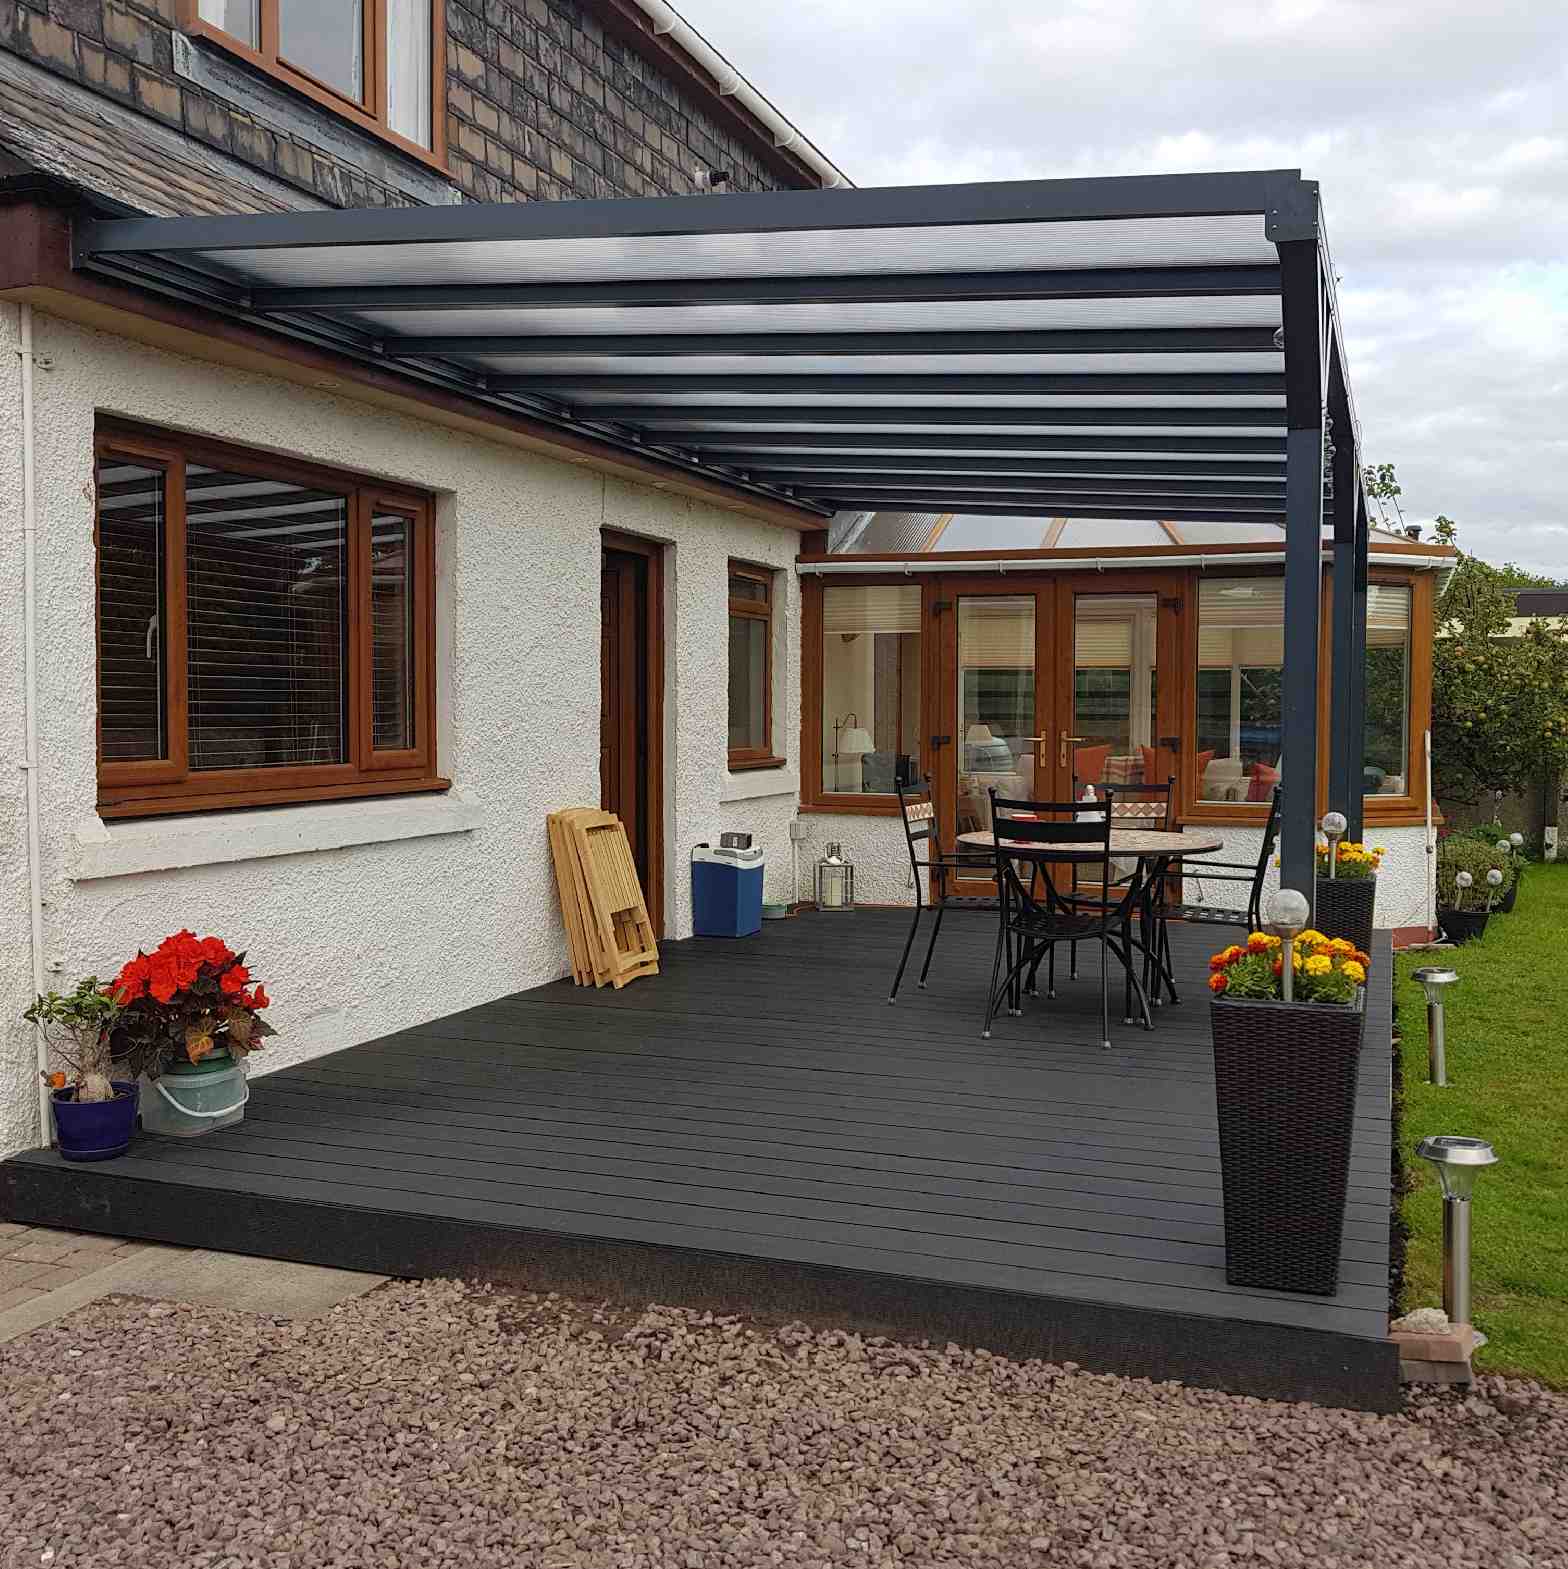 Buy Omega Verandah, Anthracite Grey, 16mm Polycarbonate Glazing - 7.0m (W) x 3.5m (P), (4) Supporting Posts online today